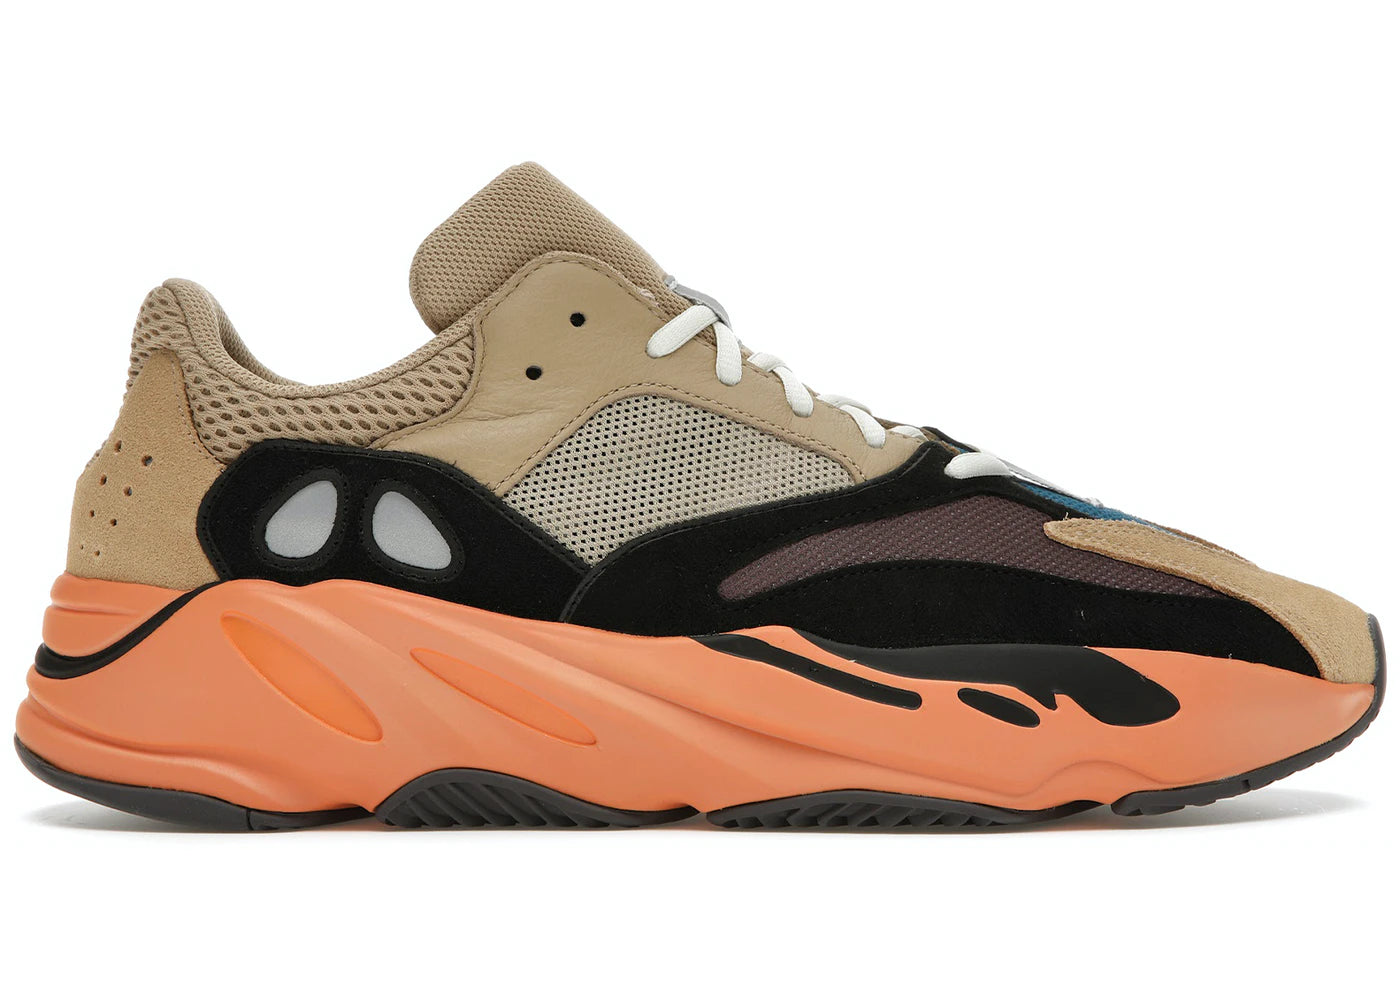 Adidas Yeezy Boost 700 Enflame Amber - Used